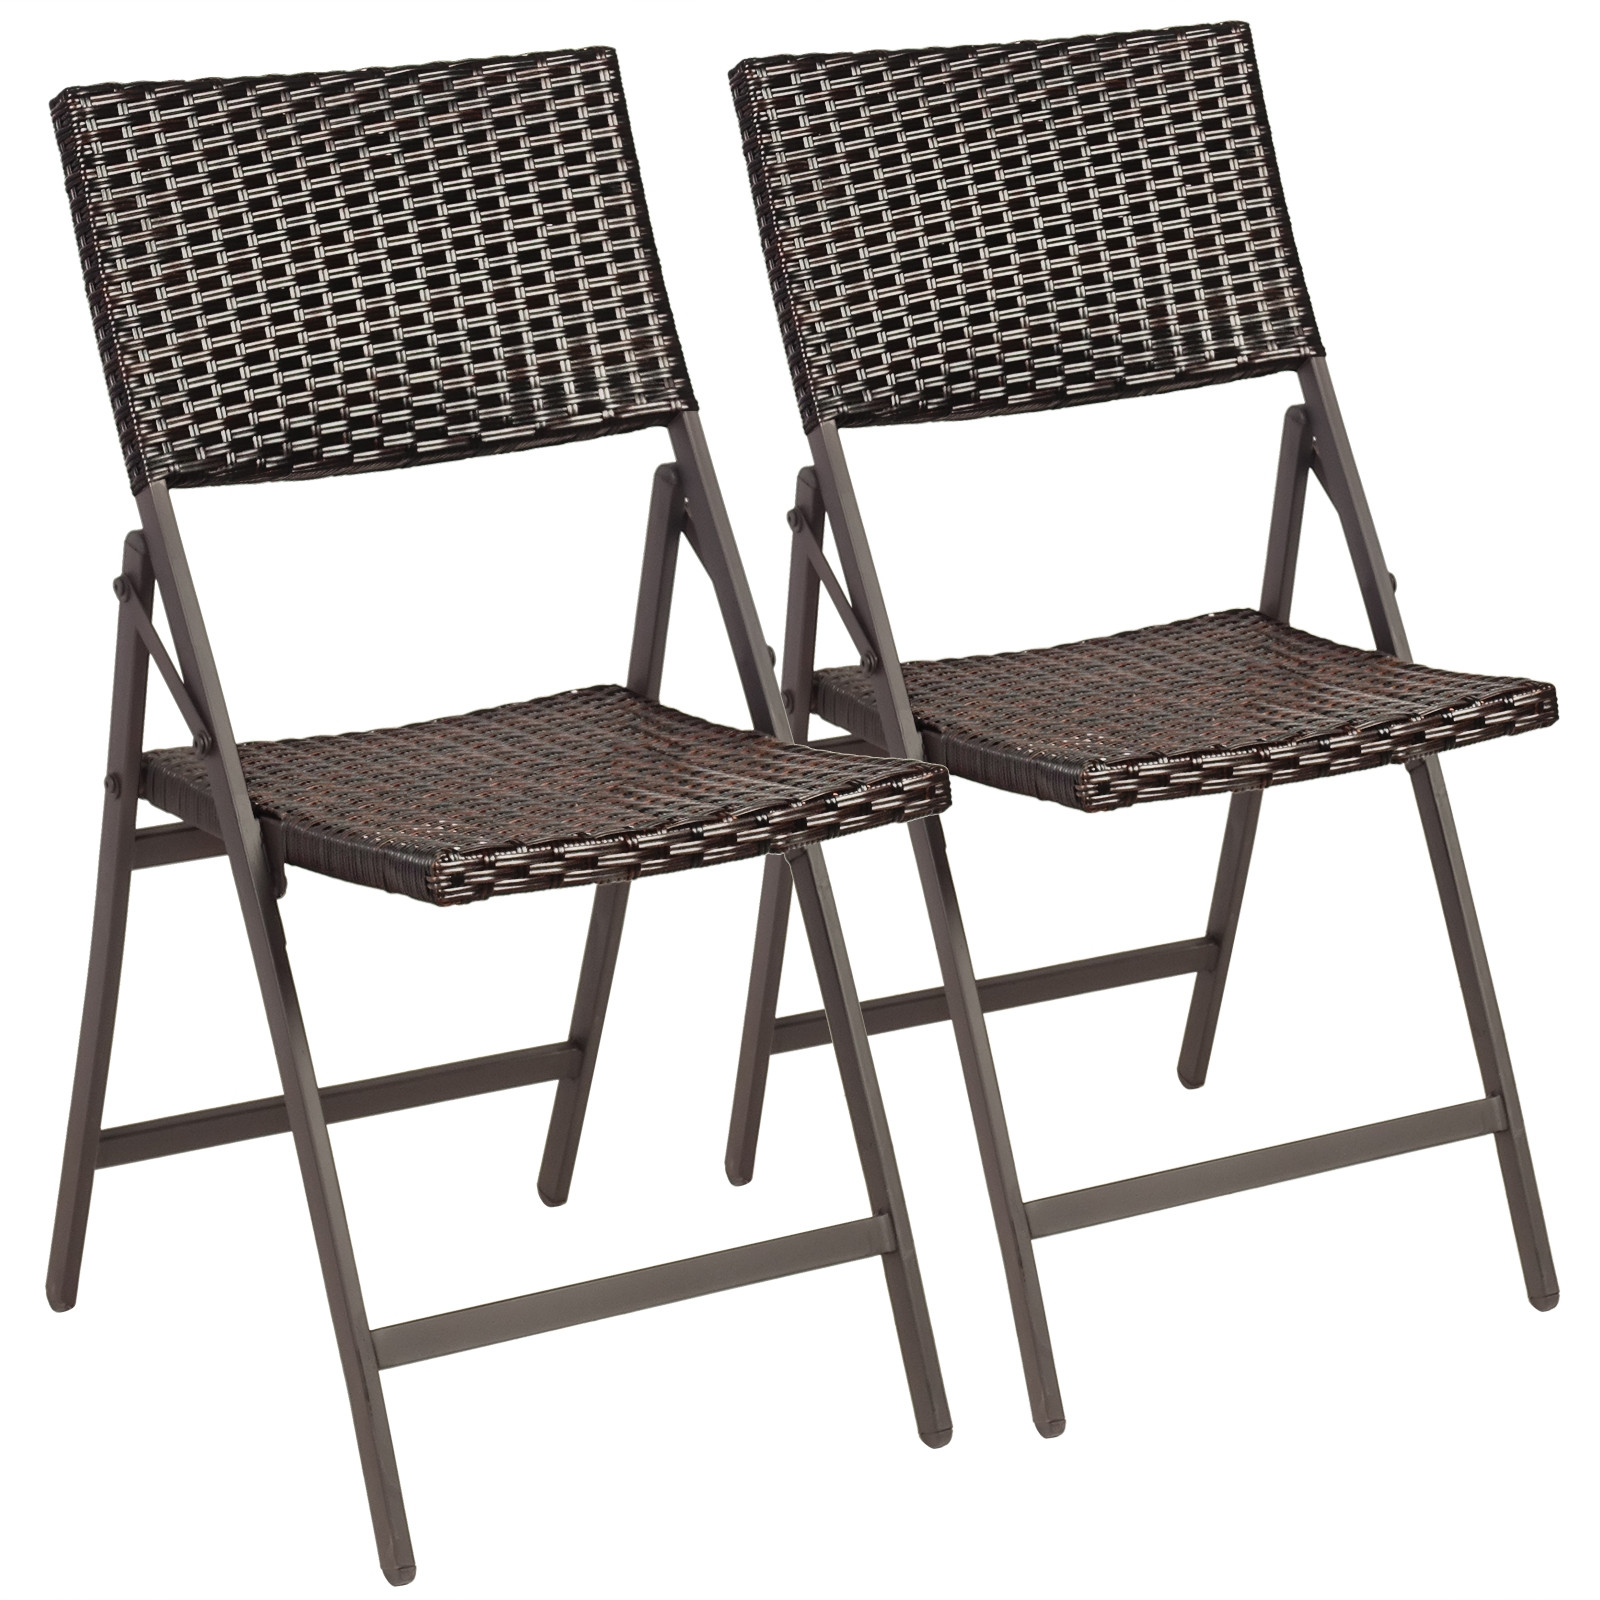 Set of 2 Patio Rattan Folding Portable Dining Chairs - Costway